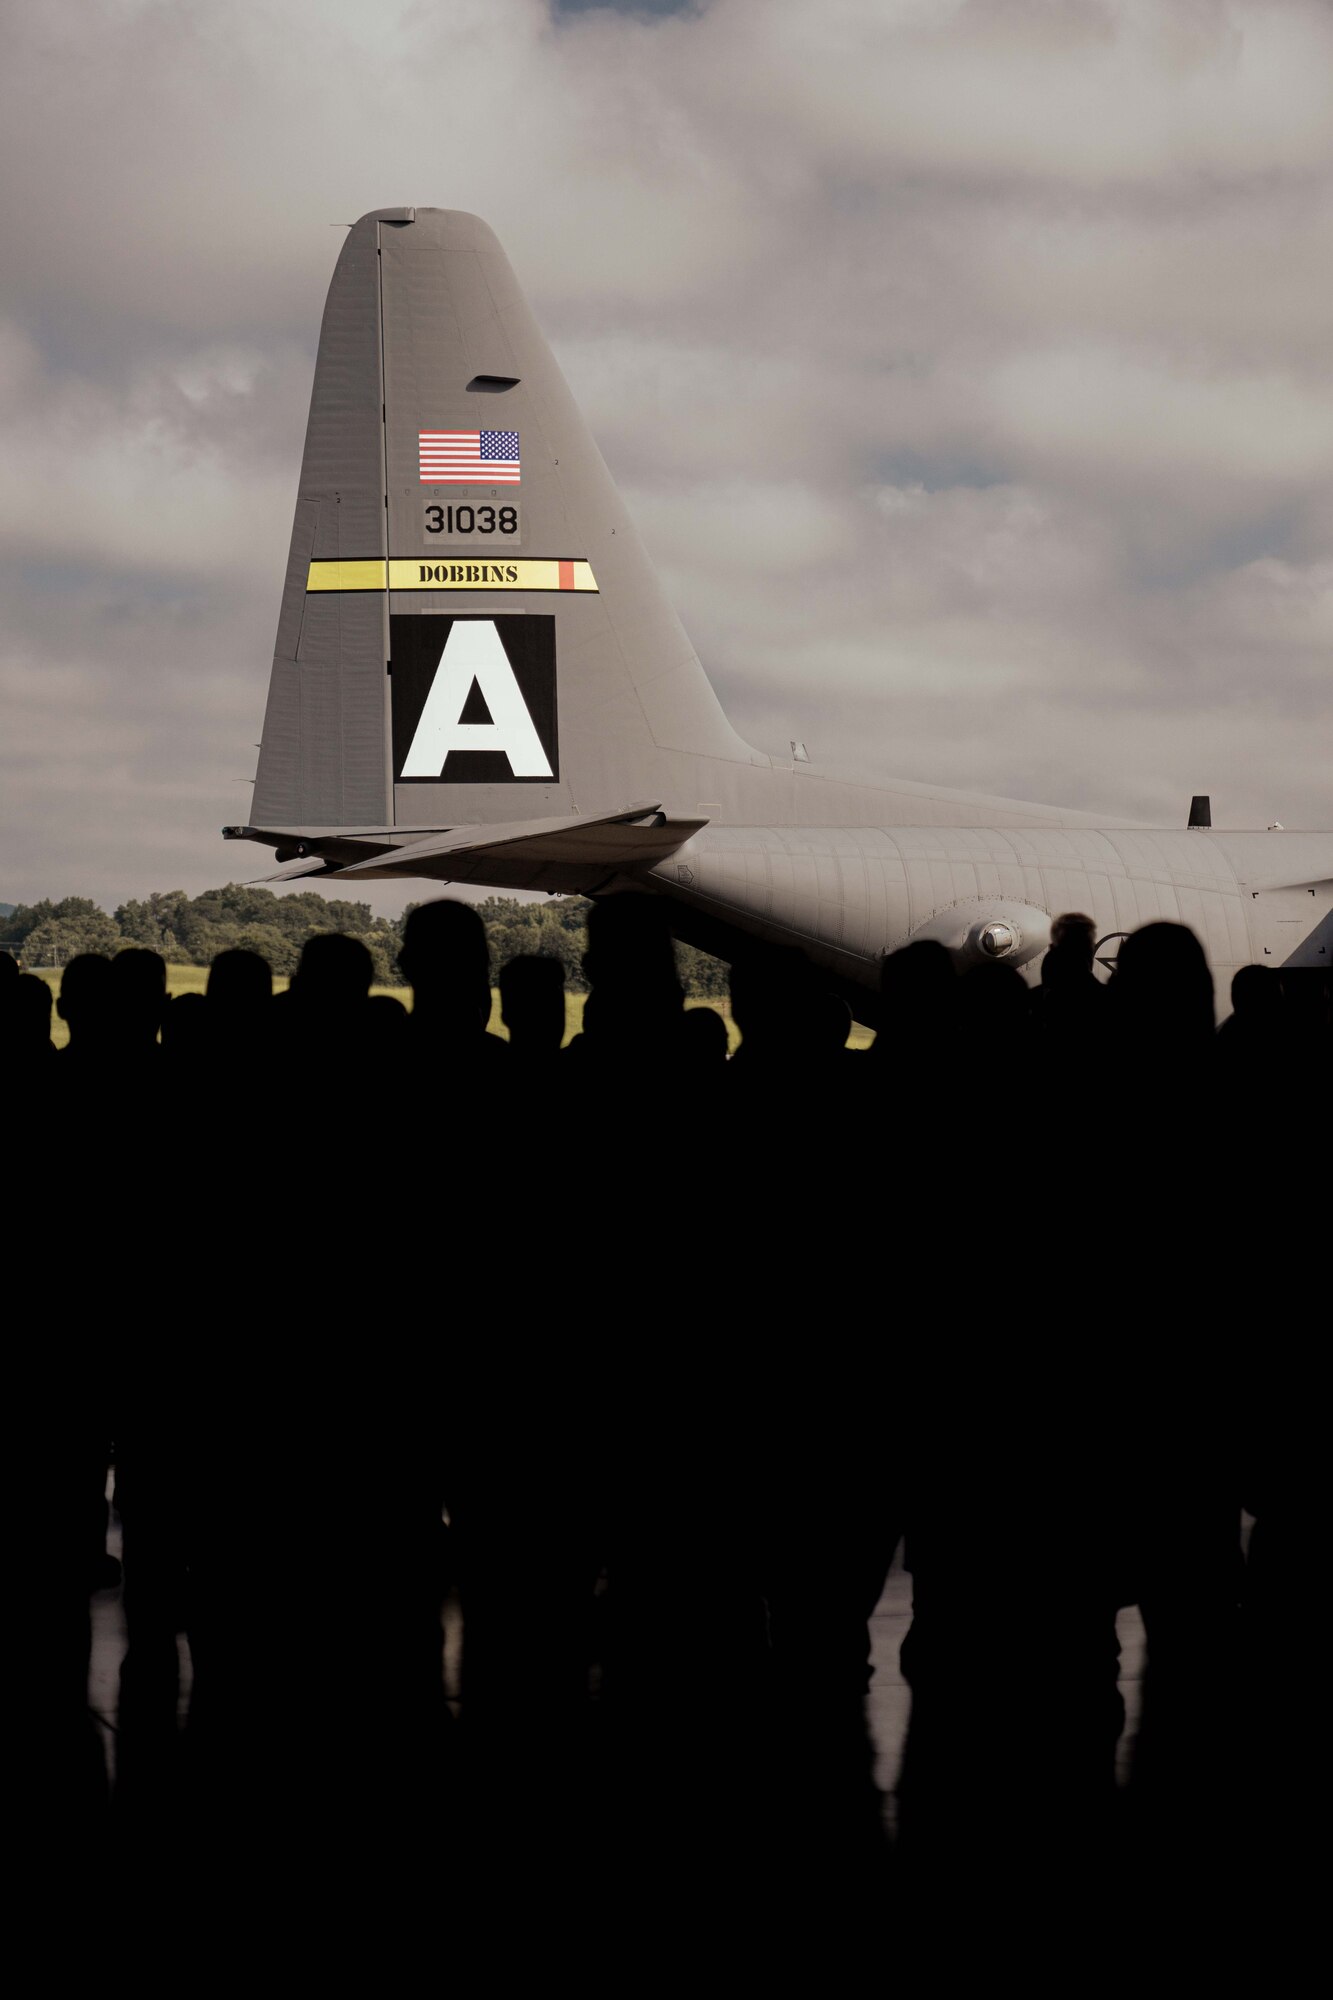 Members of the 94th Airlift Wing stand in formation in front of a C-130 Hercules aircraft.